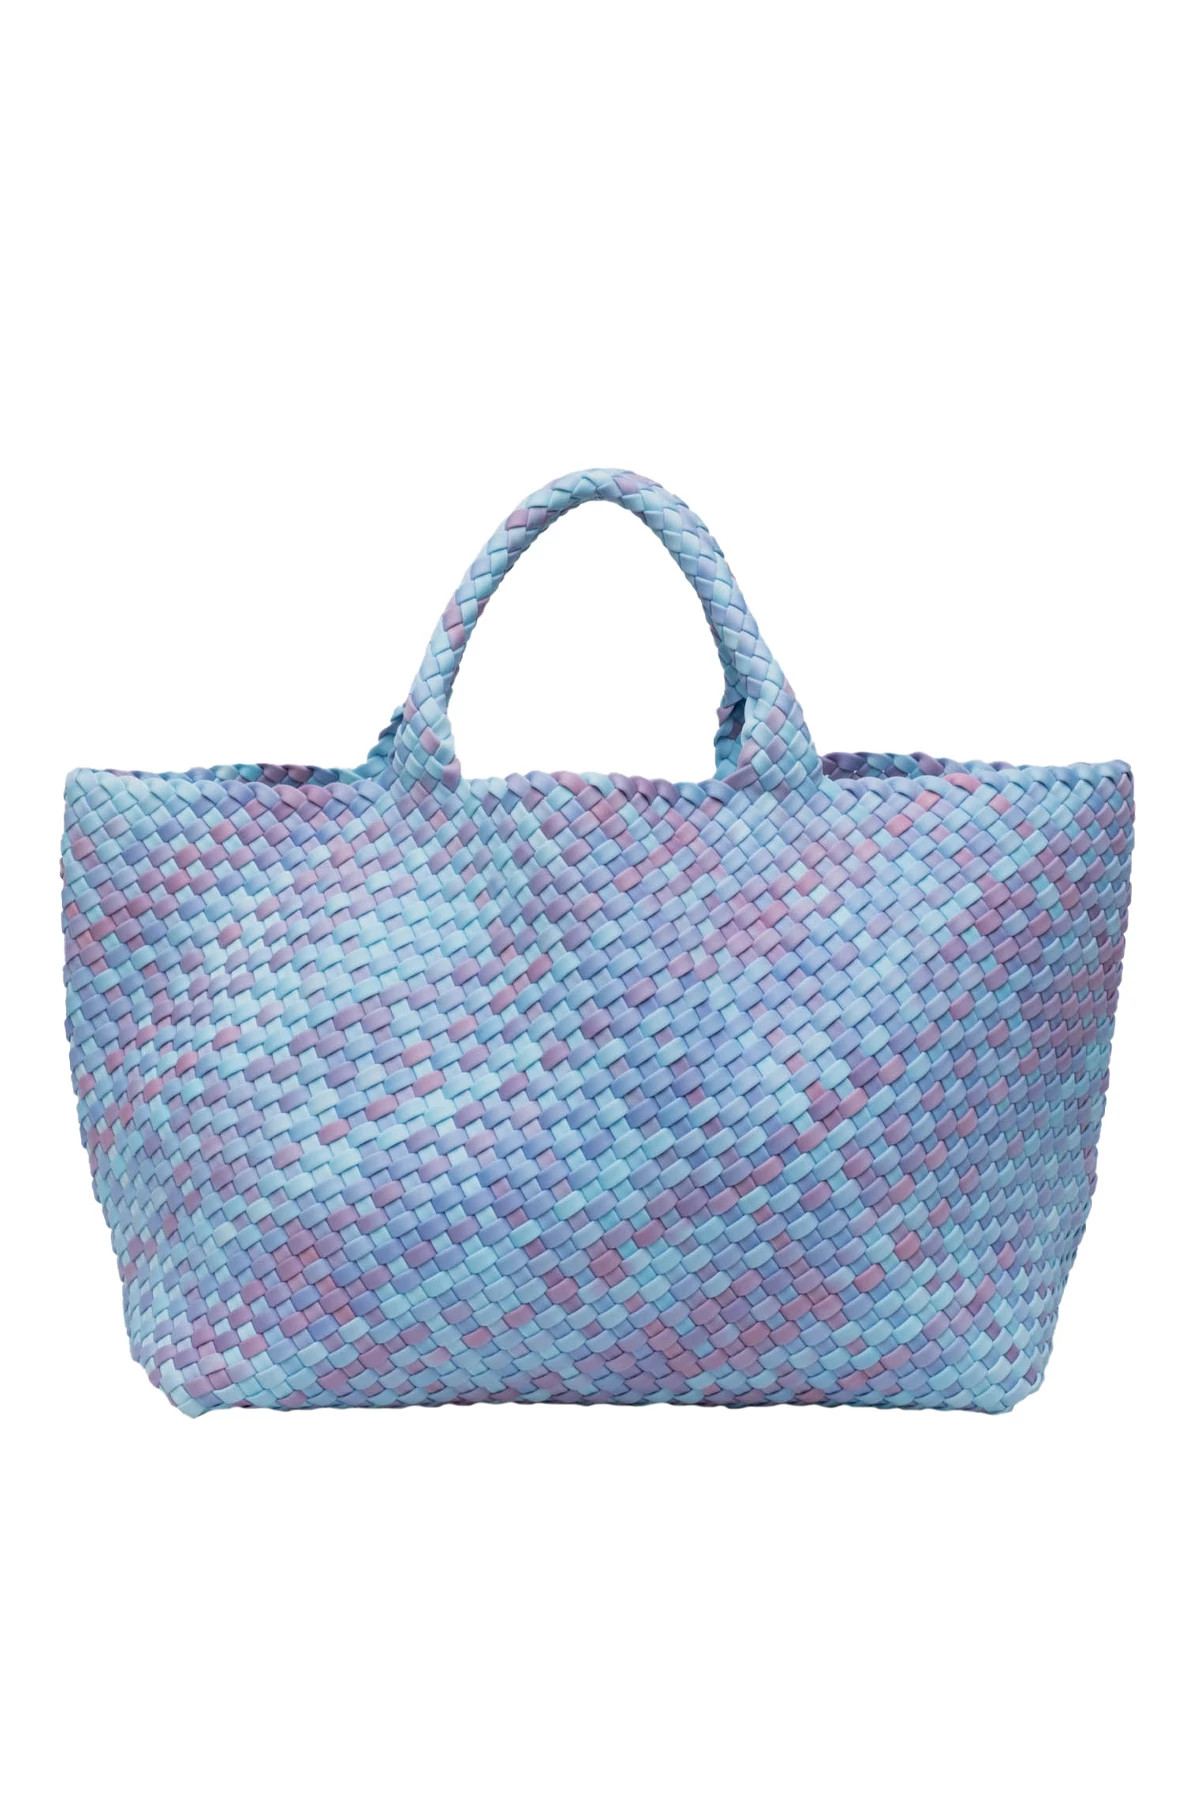 BEACH BABY St. Barths Large Tie-Dye Tote image number 1